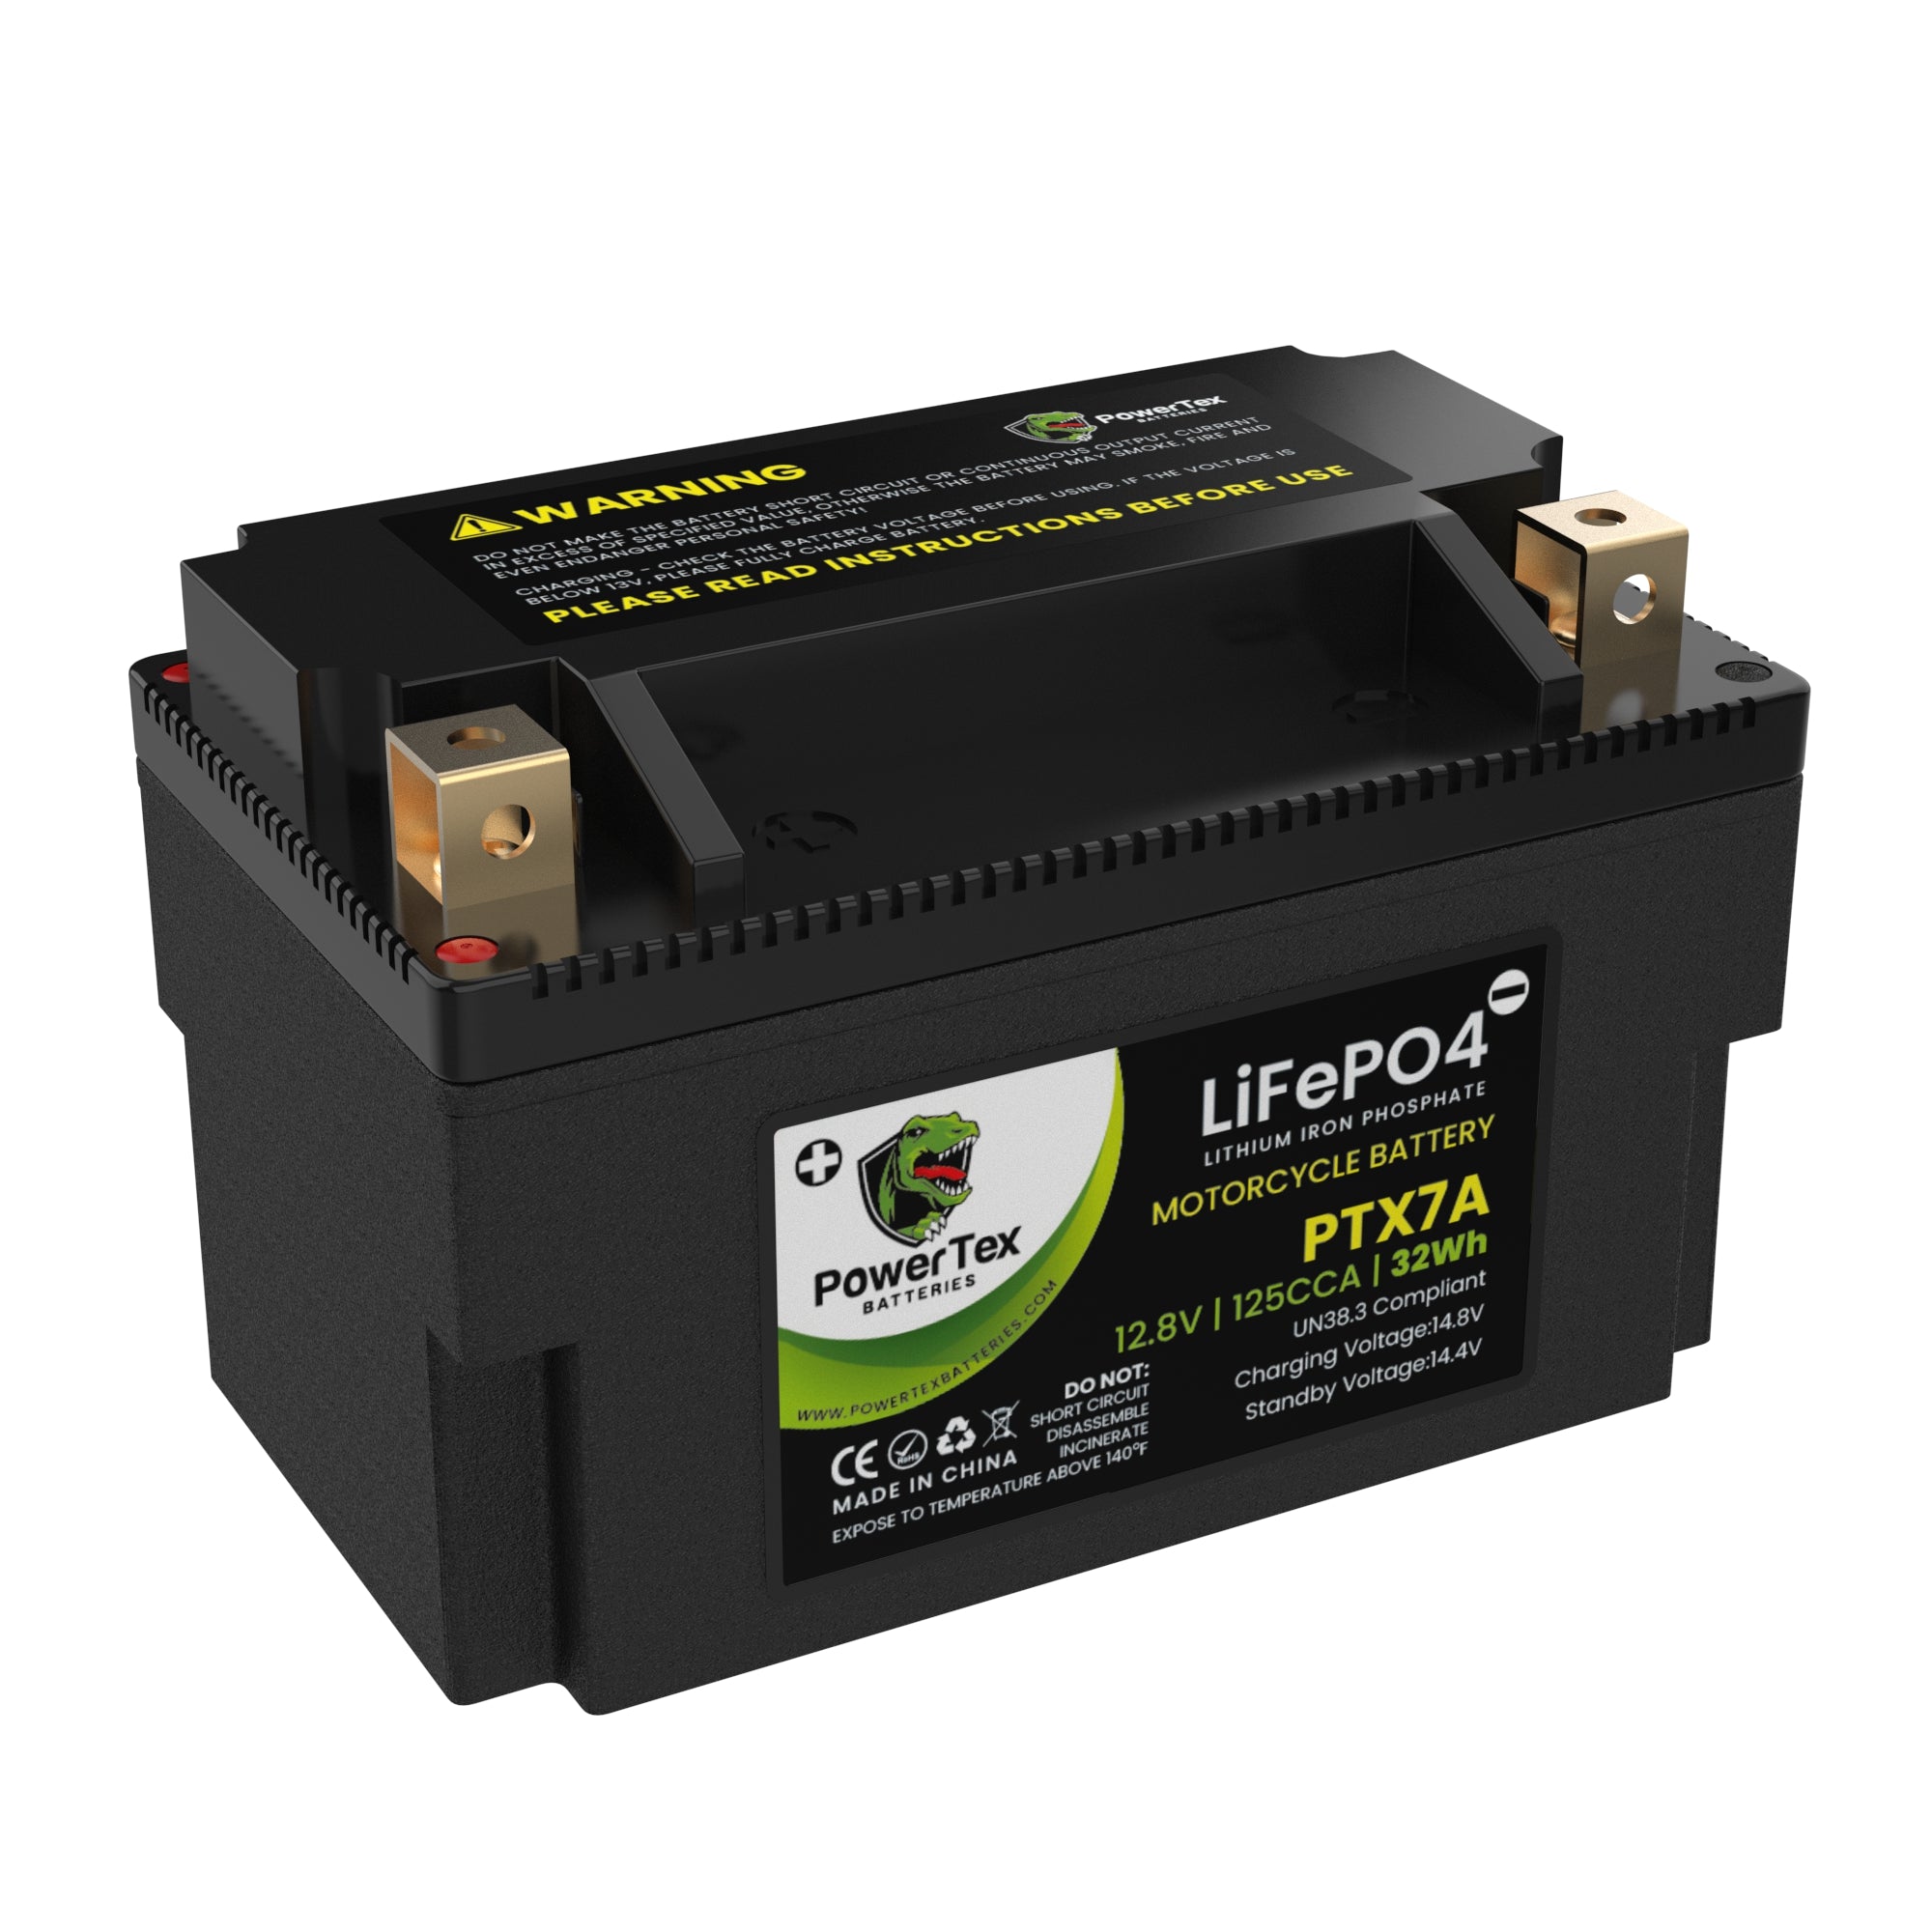 PowerTex YTX7A-BS LiFePO4 Lithium Iron Phosphate Motorcycle Battery